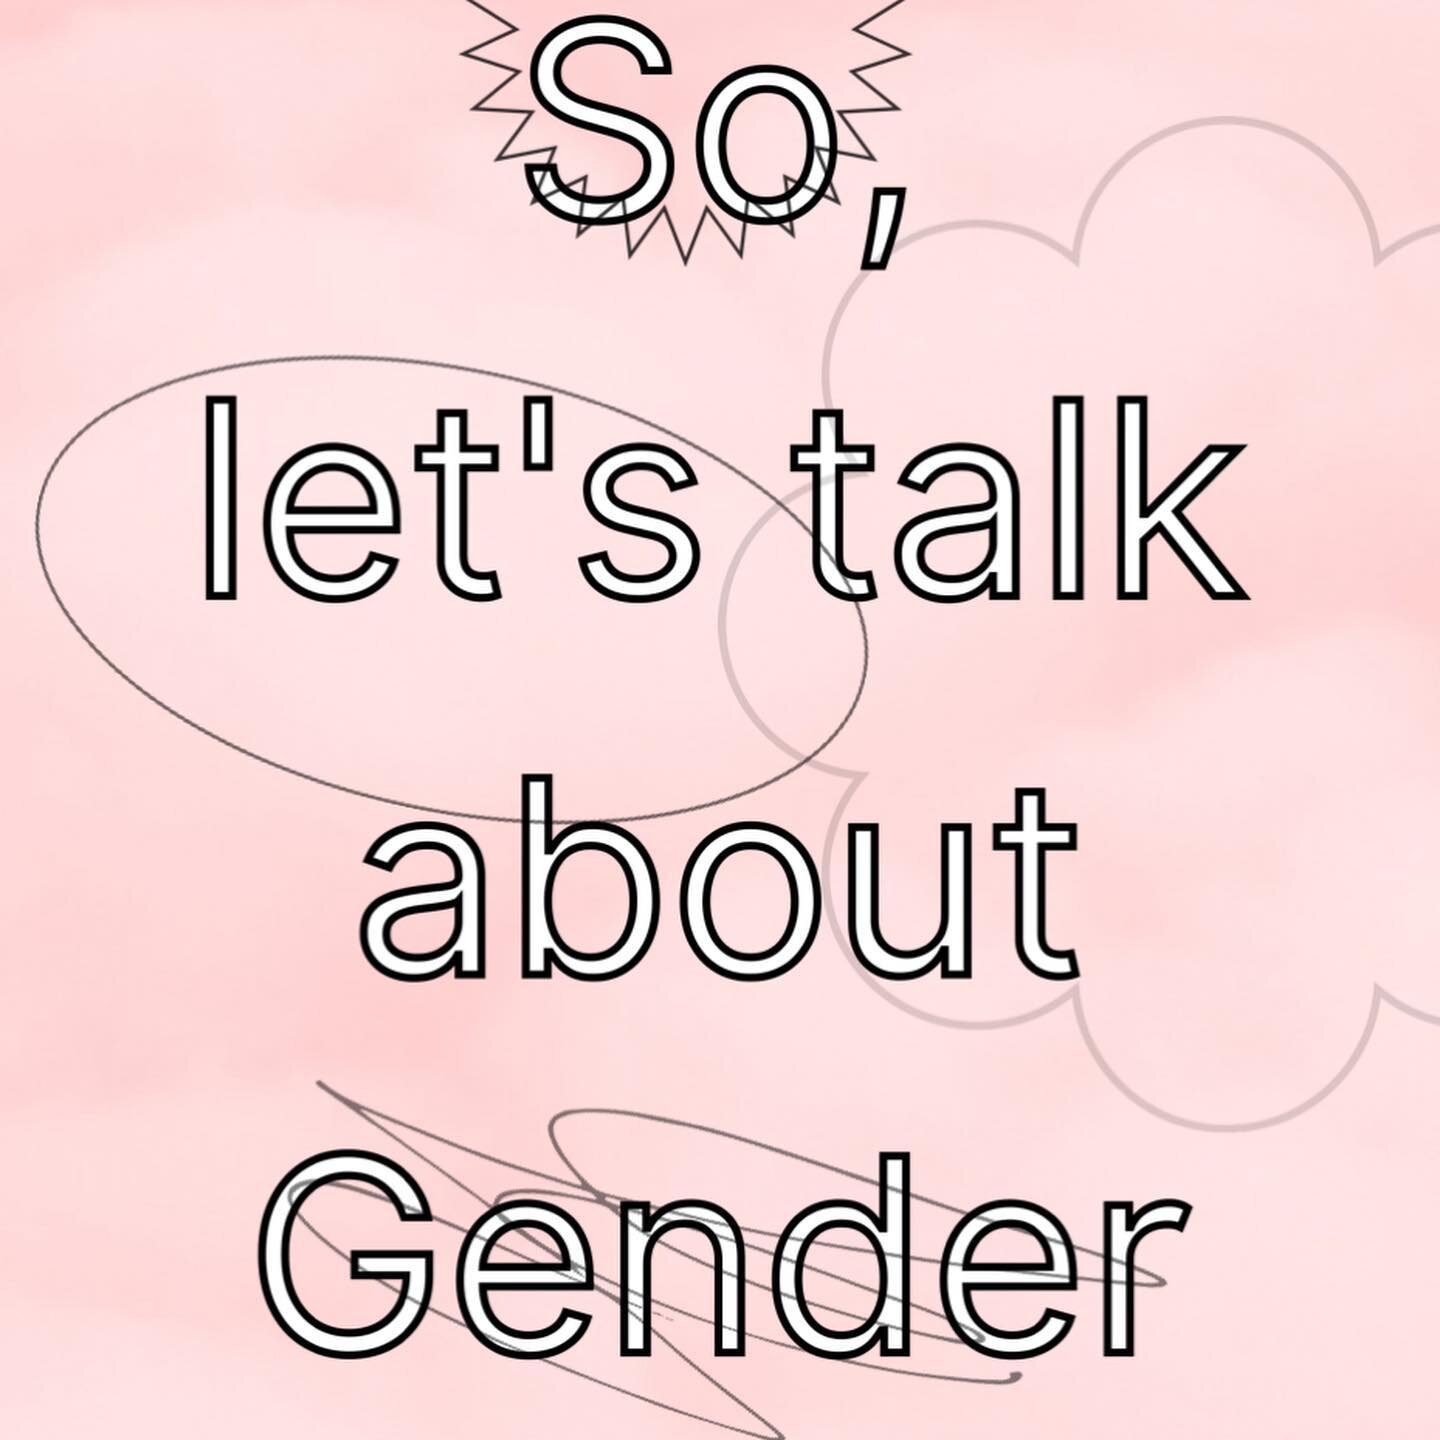 Swipe for a few must-know terms about gender💗➡️➡️